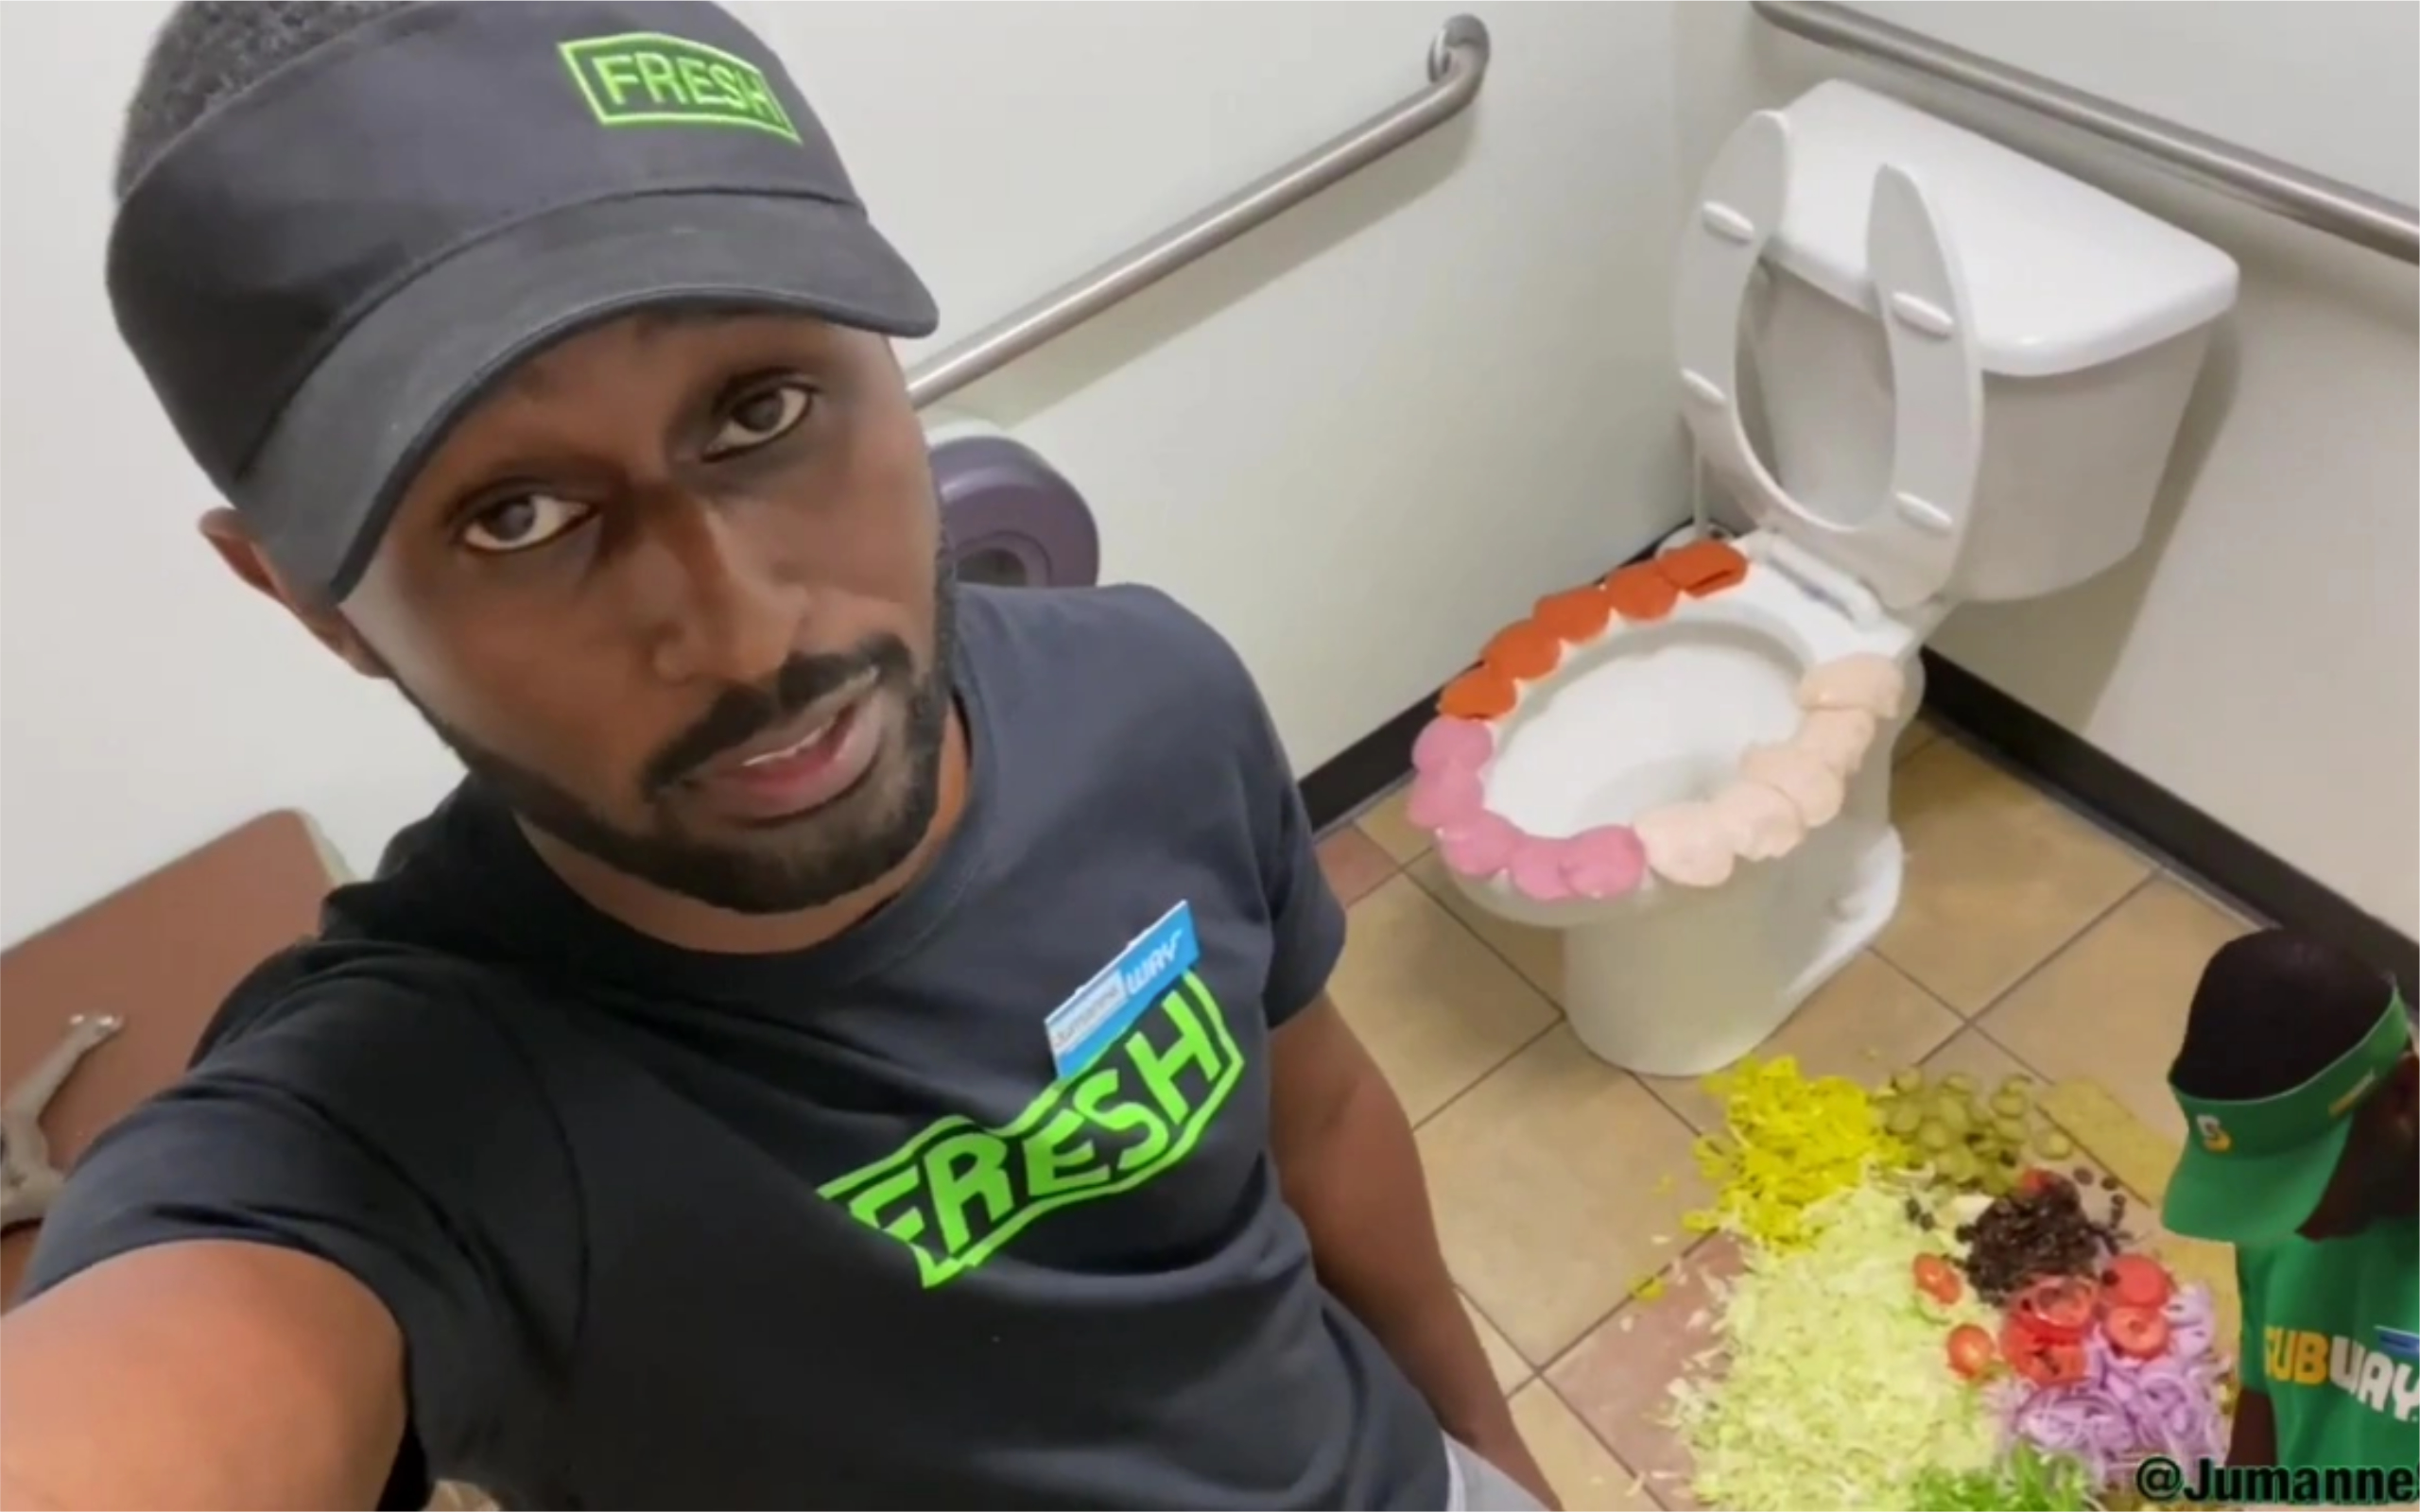 Subway Who Filmed Putting Food on Toilet Seat, Trashing Restaurant Fired